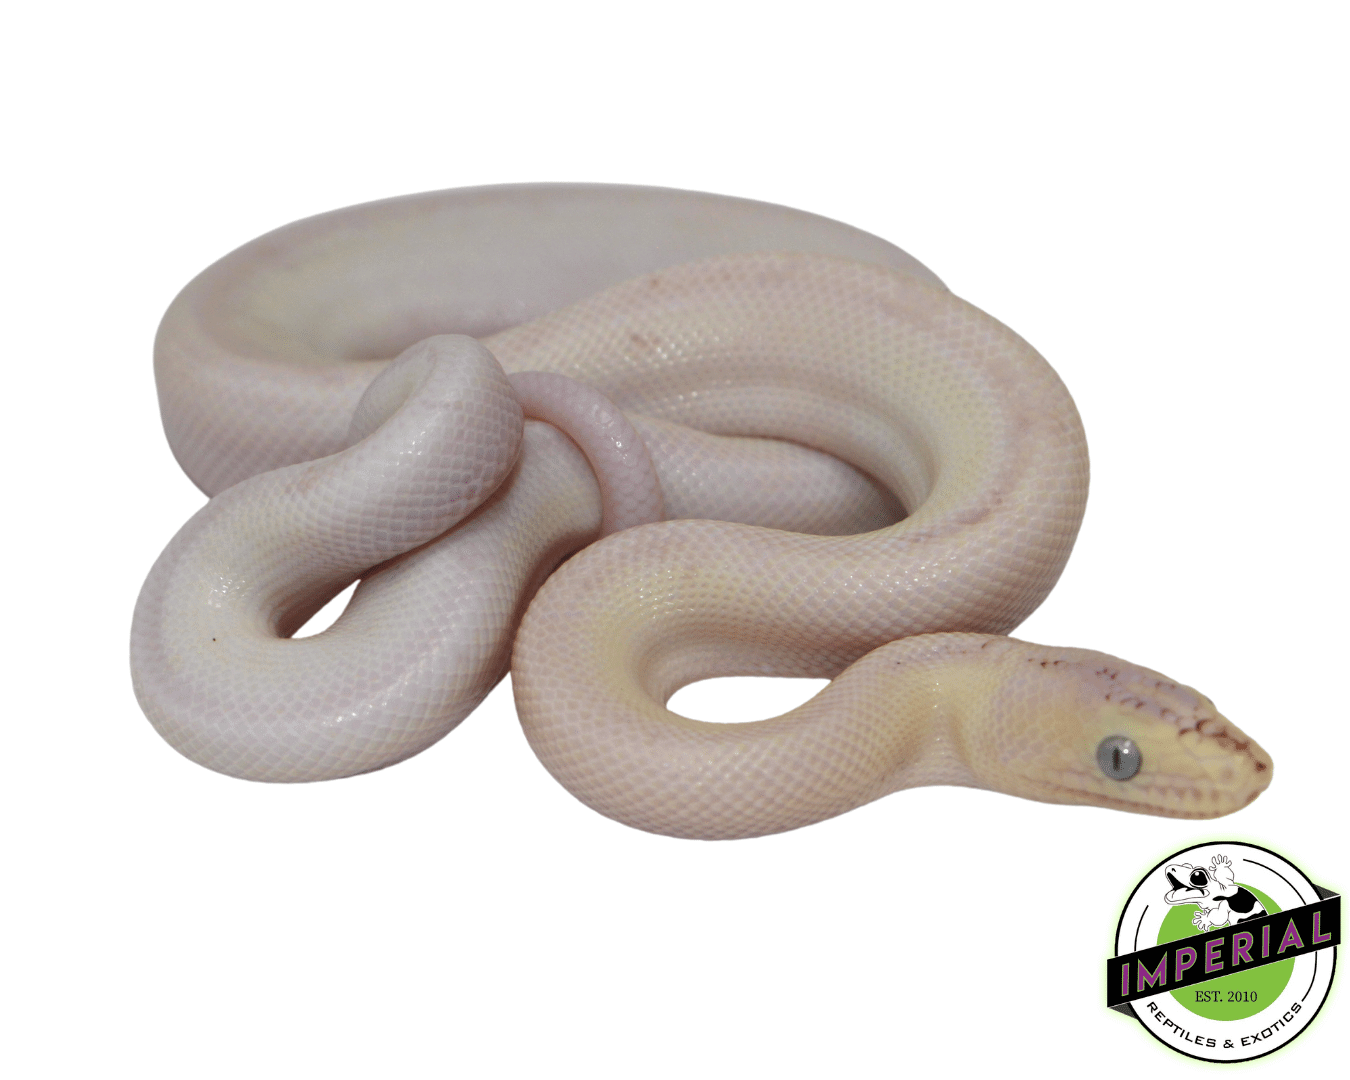 leucistic  colombian rainbow boa constrictor for sale, buy reptiles online